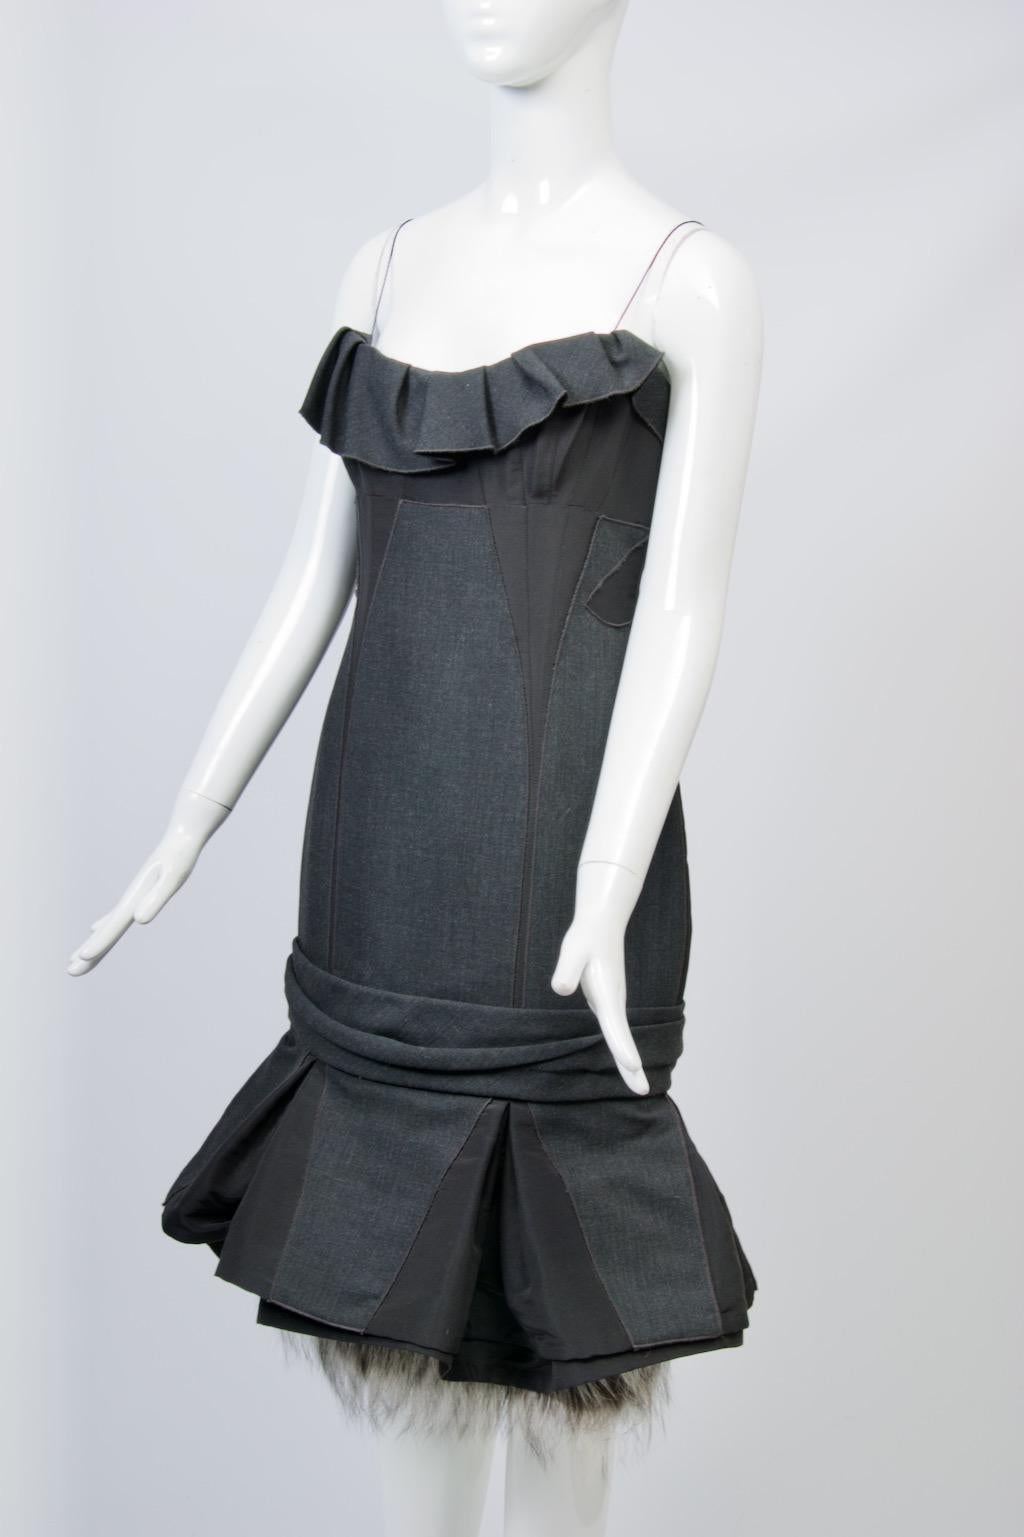 Unique cocktail dress by J. Mendel intricately constructed of charcoal wool and black faille and featuring a silver fox border which peeks out of the flounced hem. While the main body of the fitted dress is crafted of black faille, the front has